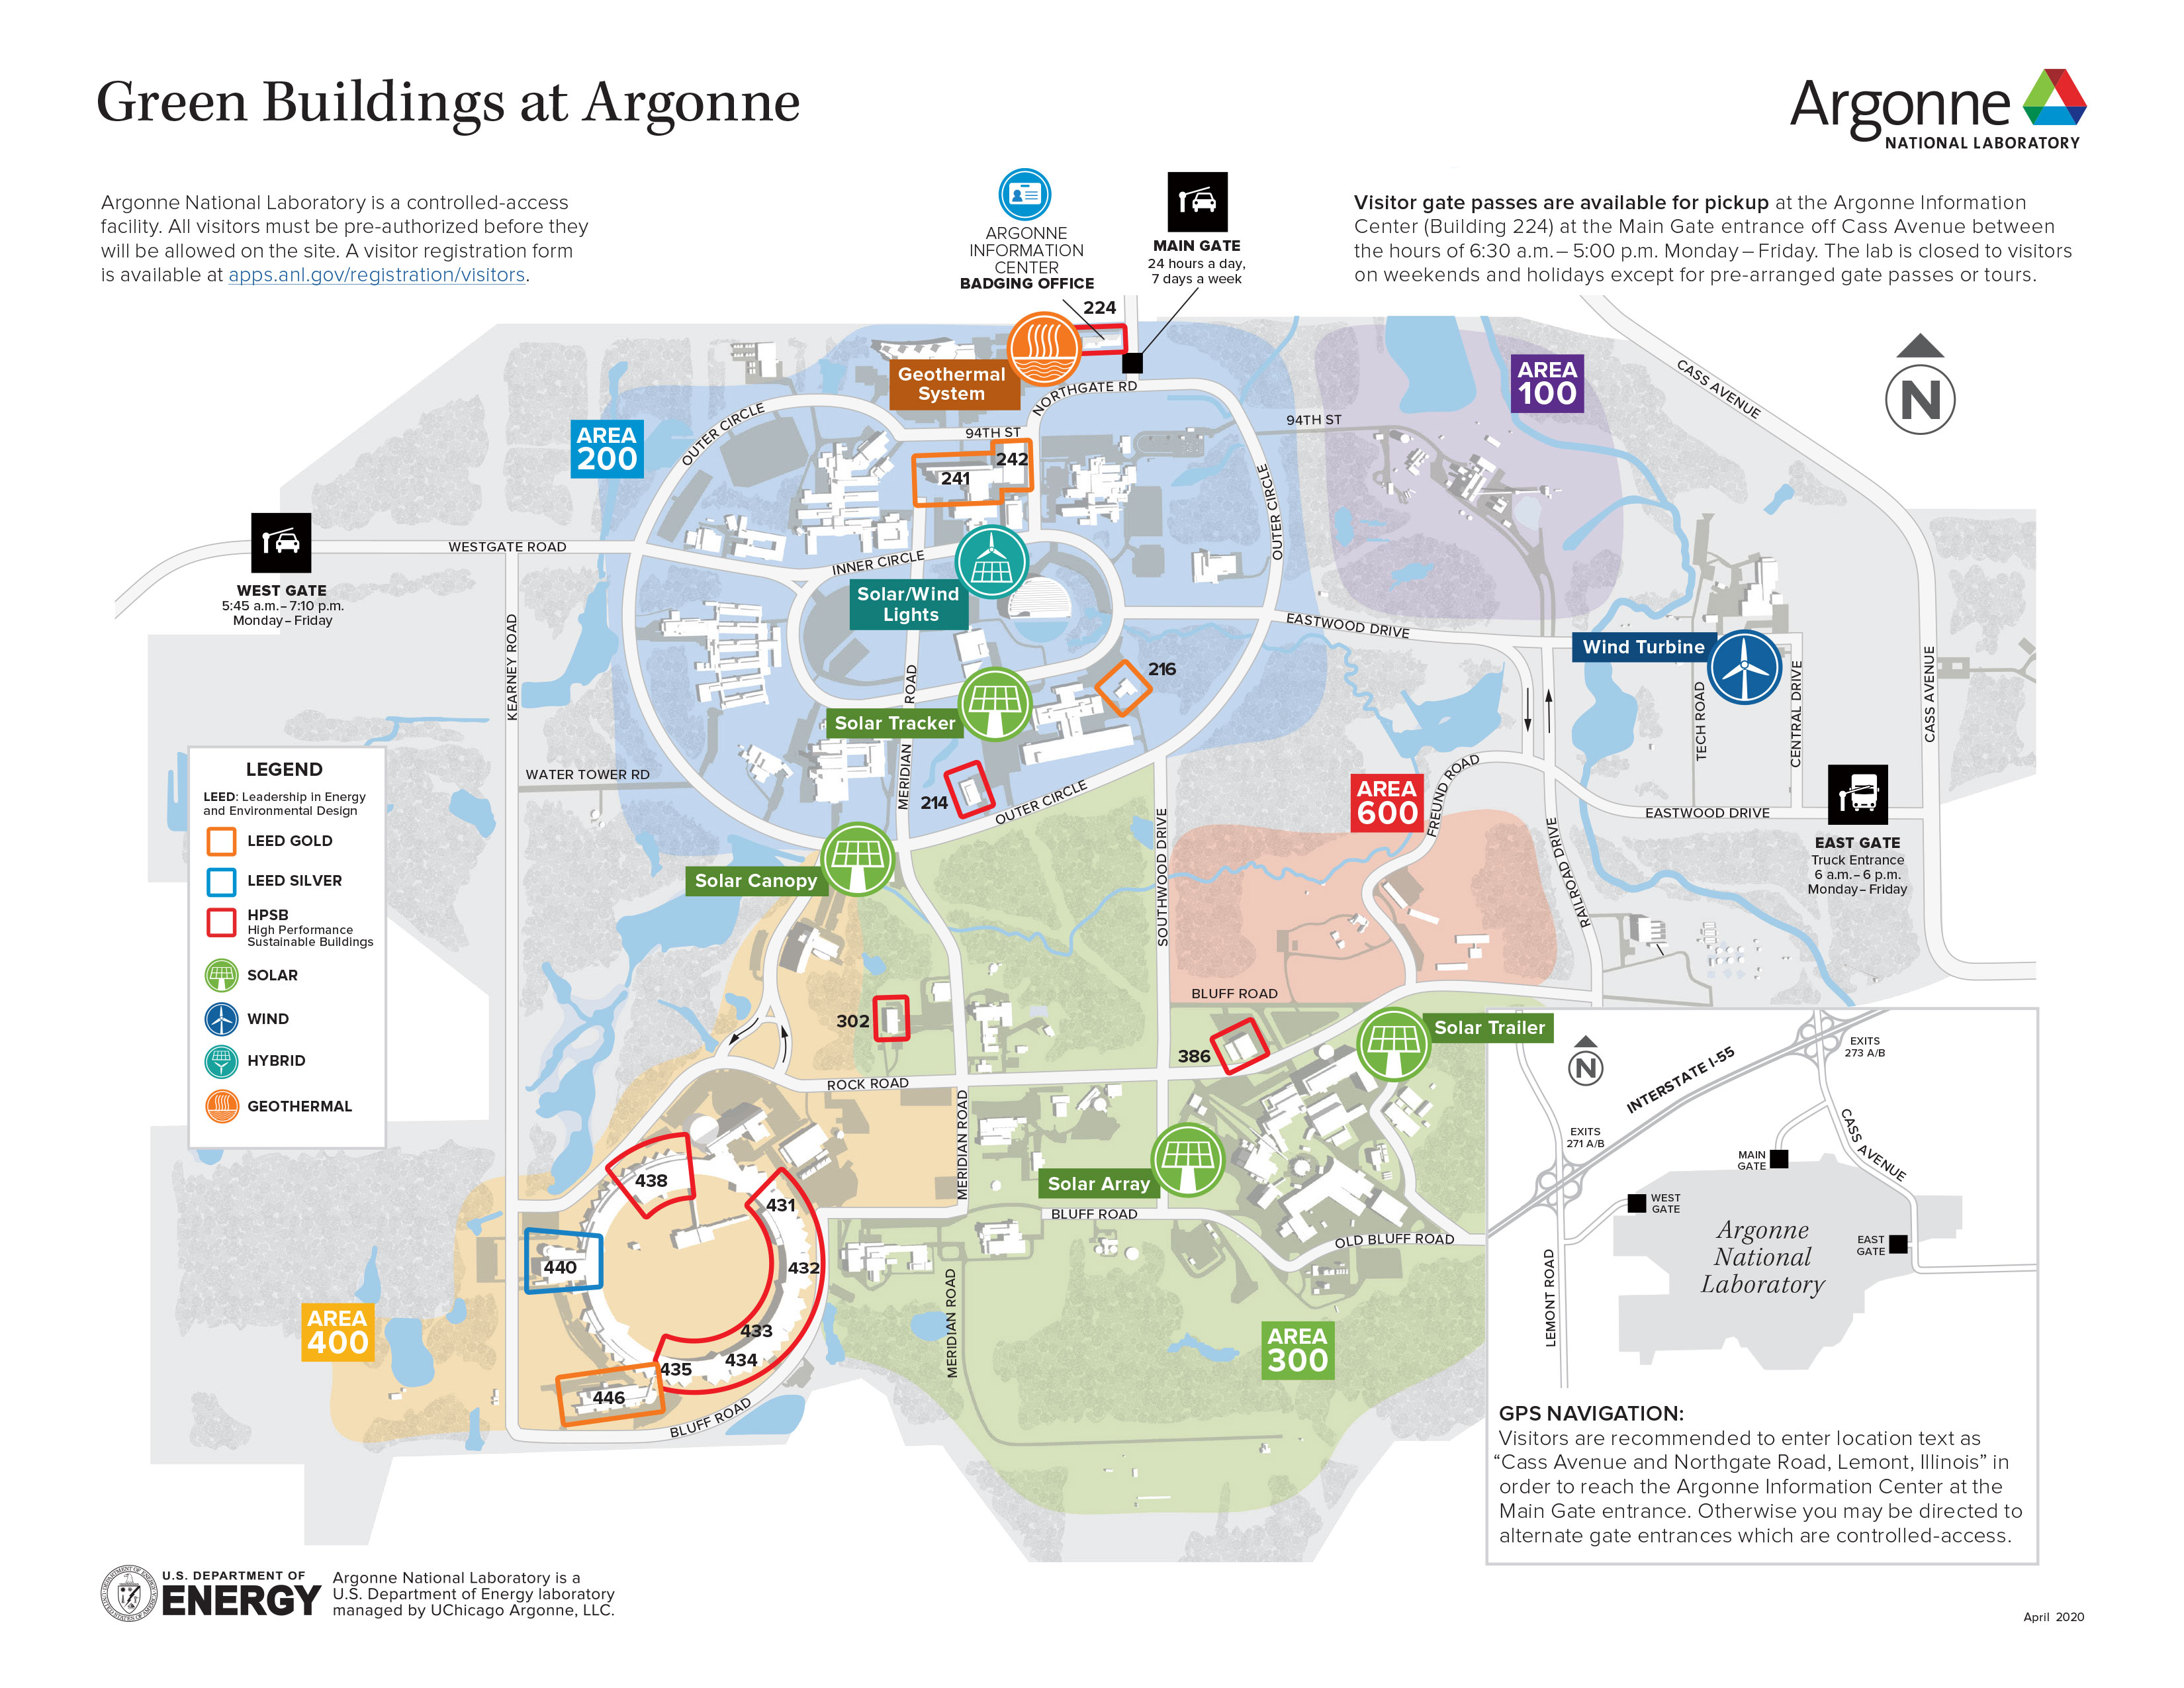 Green Buildings at Argonne National Laboratory